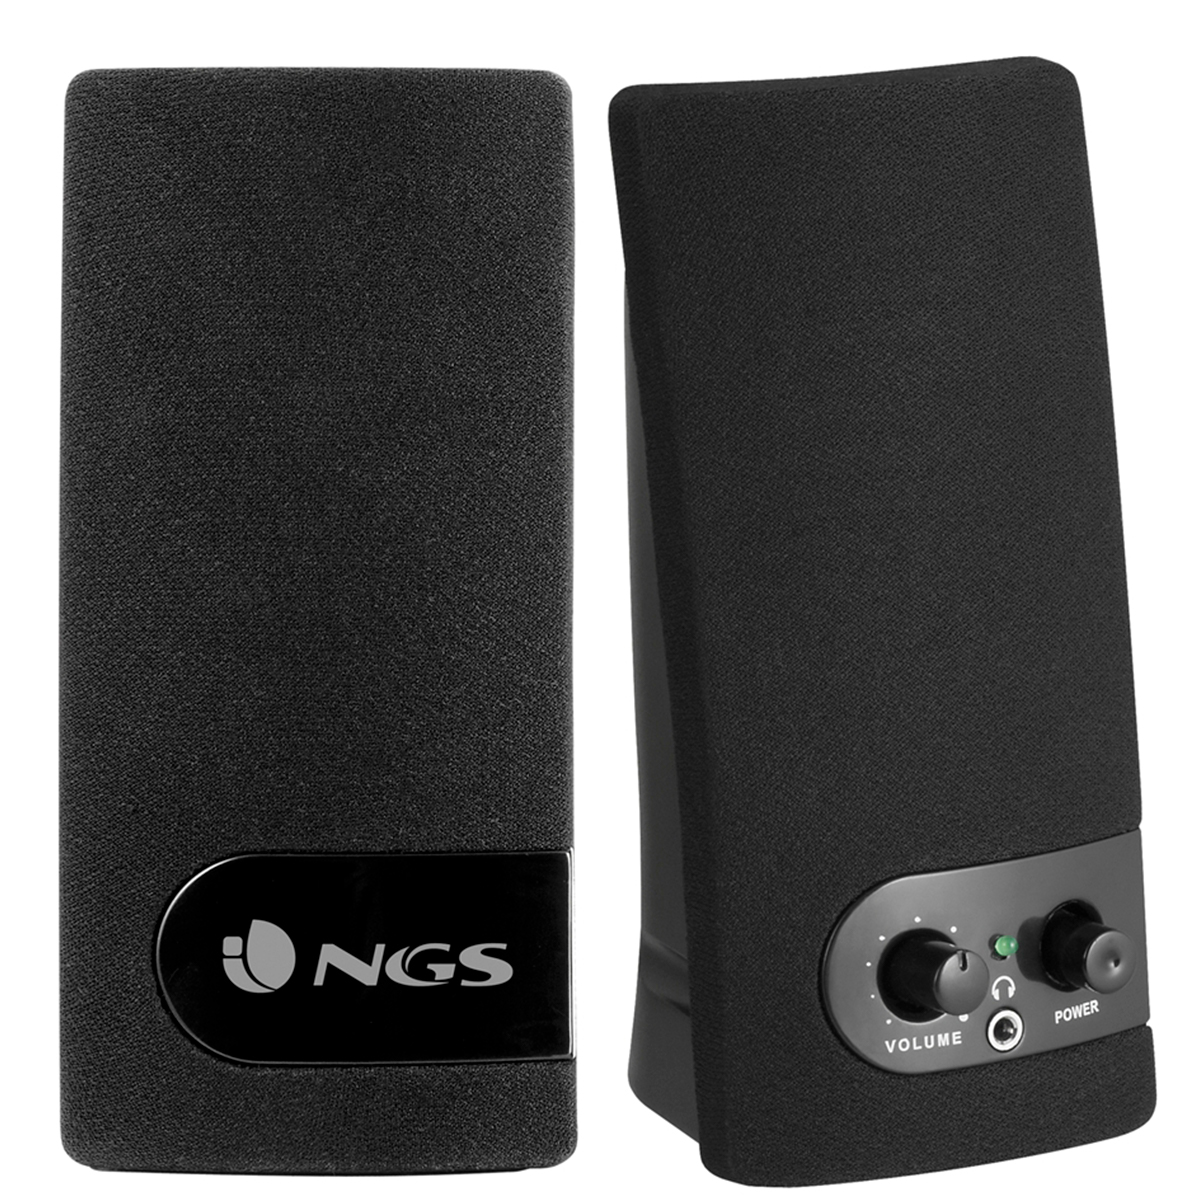 NGS ALTAVOCES USB 2.0 4W